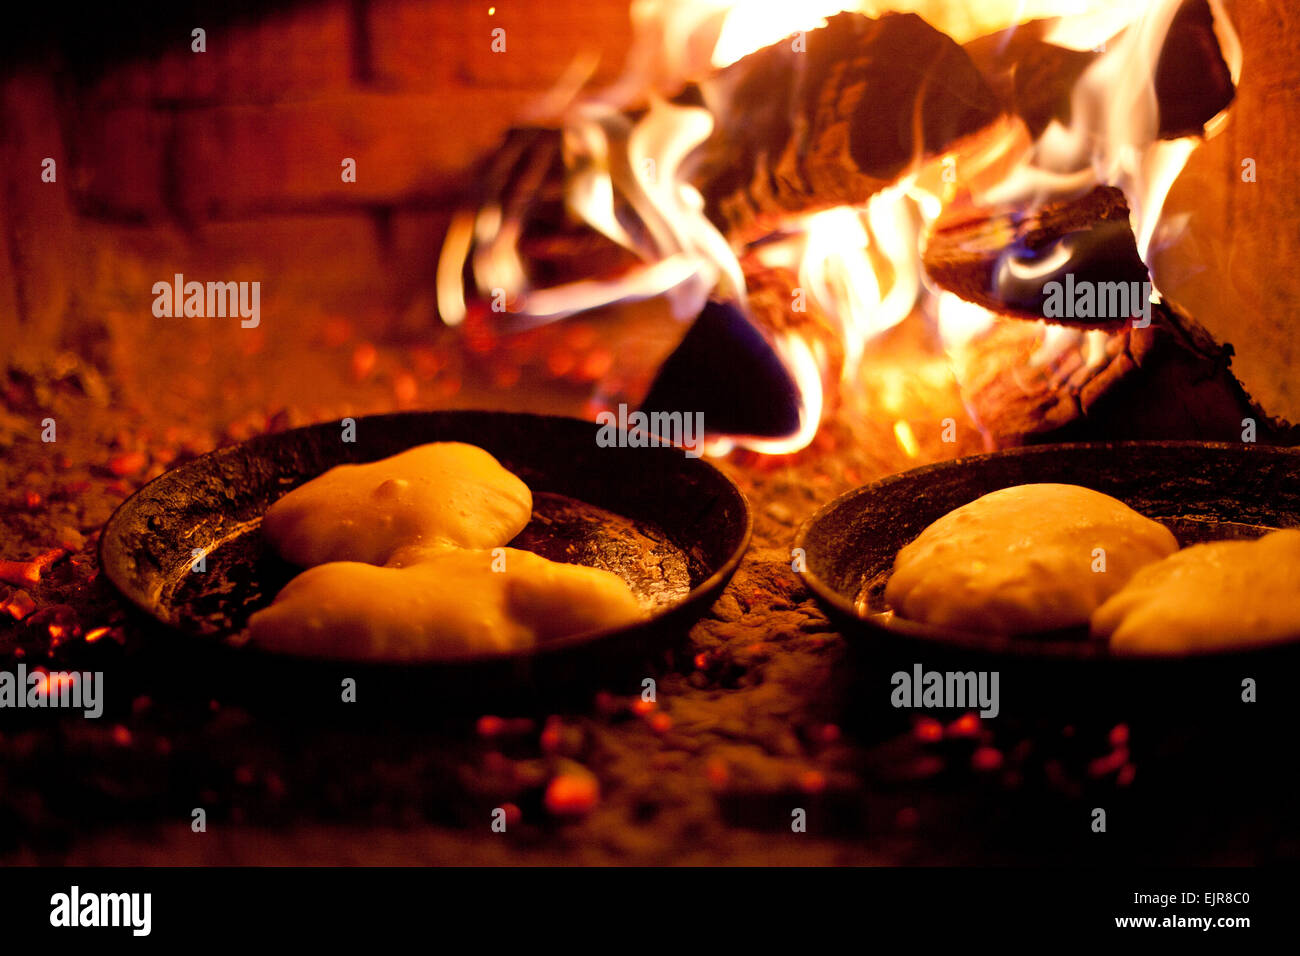 Close up of pastries cooking in skillets near wood fire Stock Photo